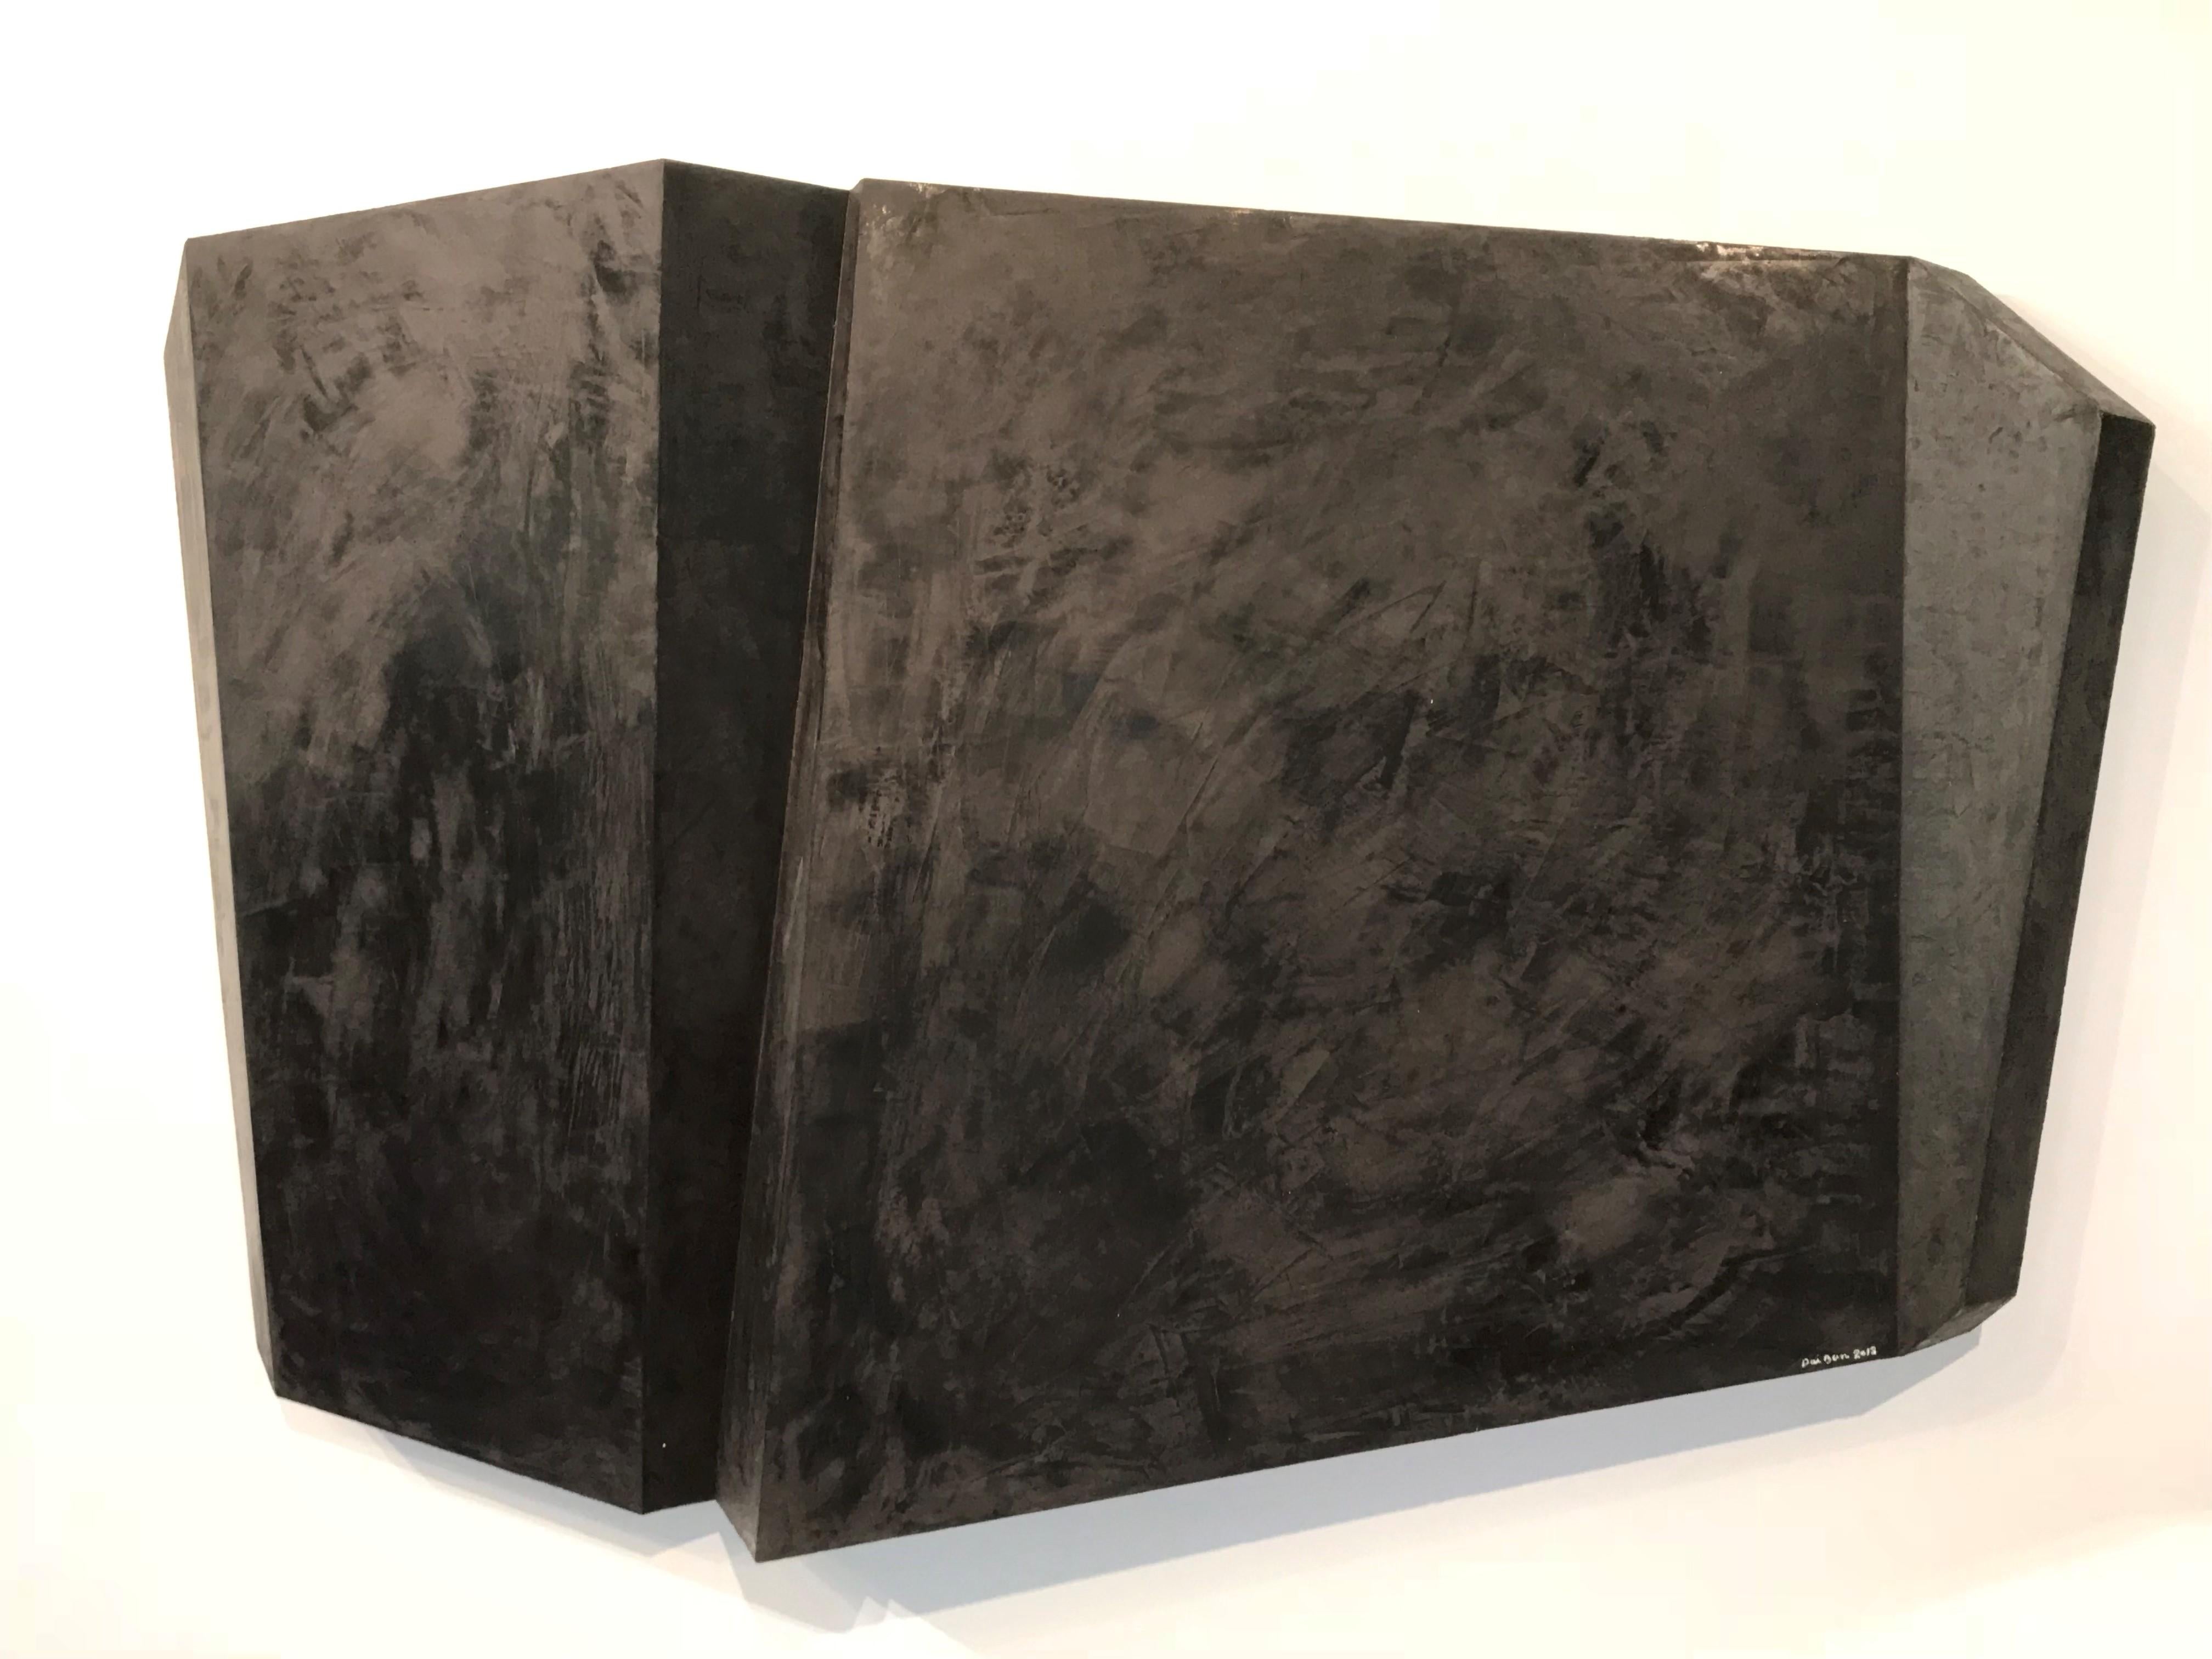 Black Mirror (Minimalist Horizontal Japanese Abstract Wall Sculpture)
 by Japanese born artist, Dai Ban, in 2019
35 x 52 x 7.5 inches 
Precision board, Venetian plaster and pigment 
Hangs with a wire installed on the back (see detail views)
Signed,